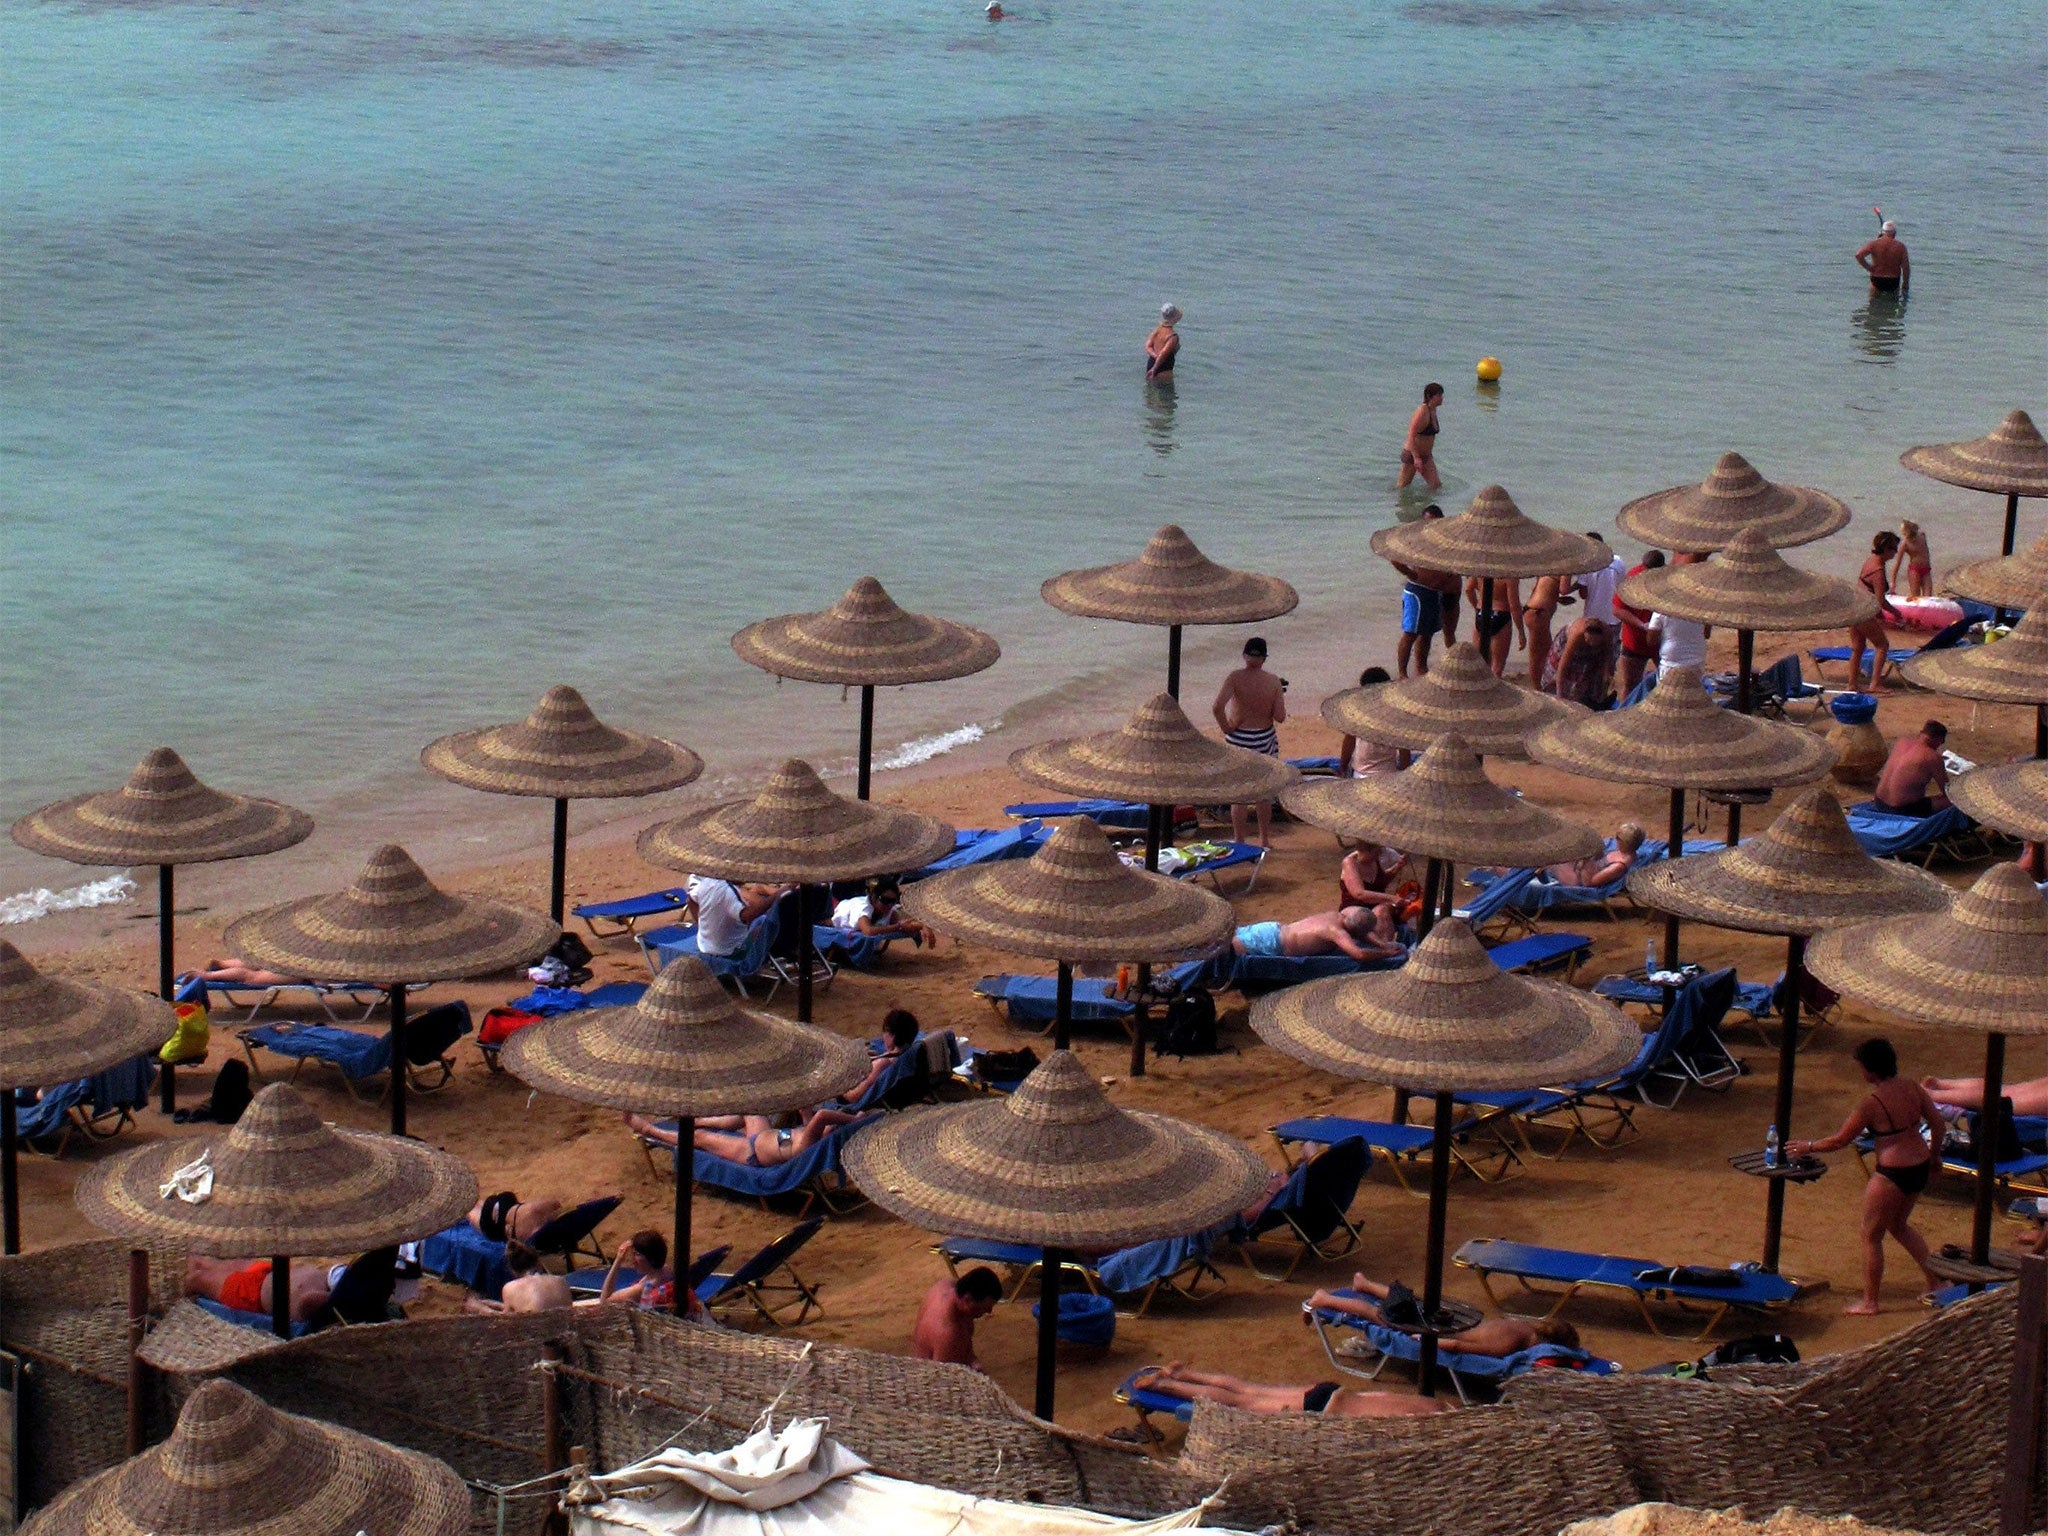 There are thought to be around 20,000 Britons currently in Sharm el-Sheikh